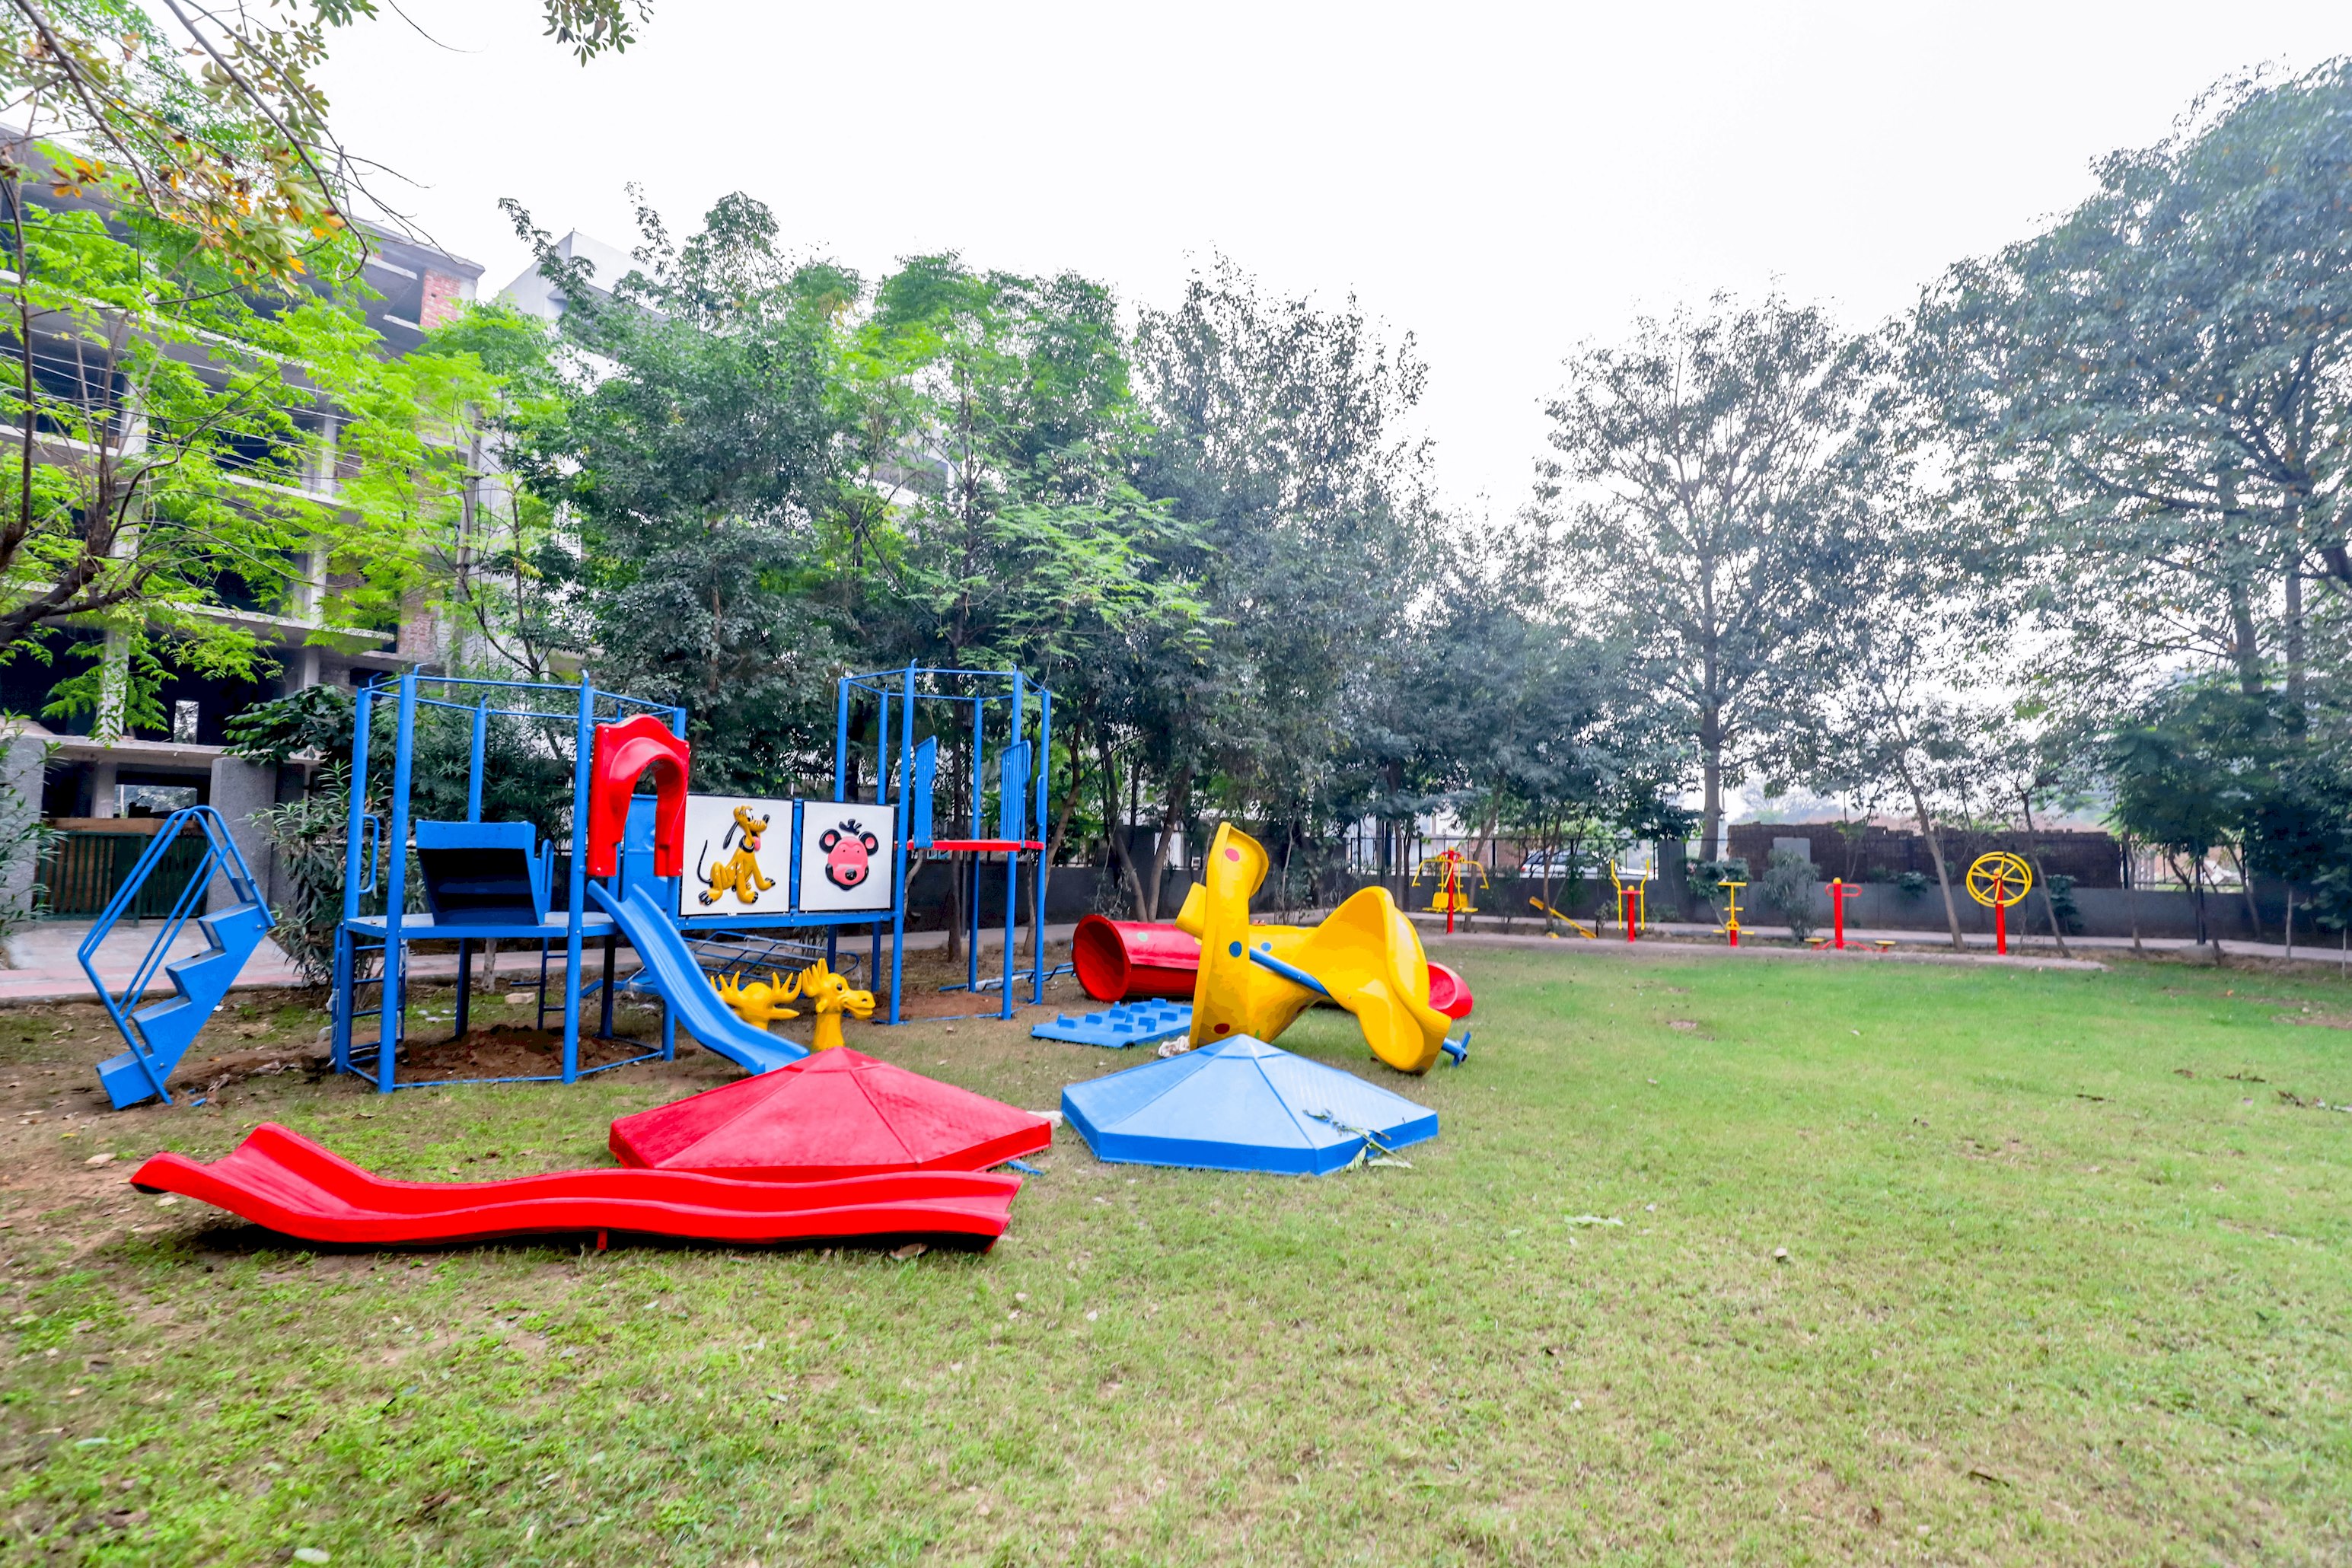 A Dynamic Park Scene with Children Delighting in Rides and Games, Surrounded by Playful Equipment, Echoing with Joyful Laughter.
